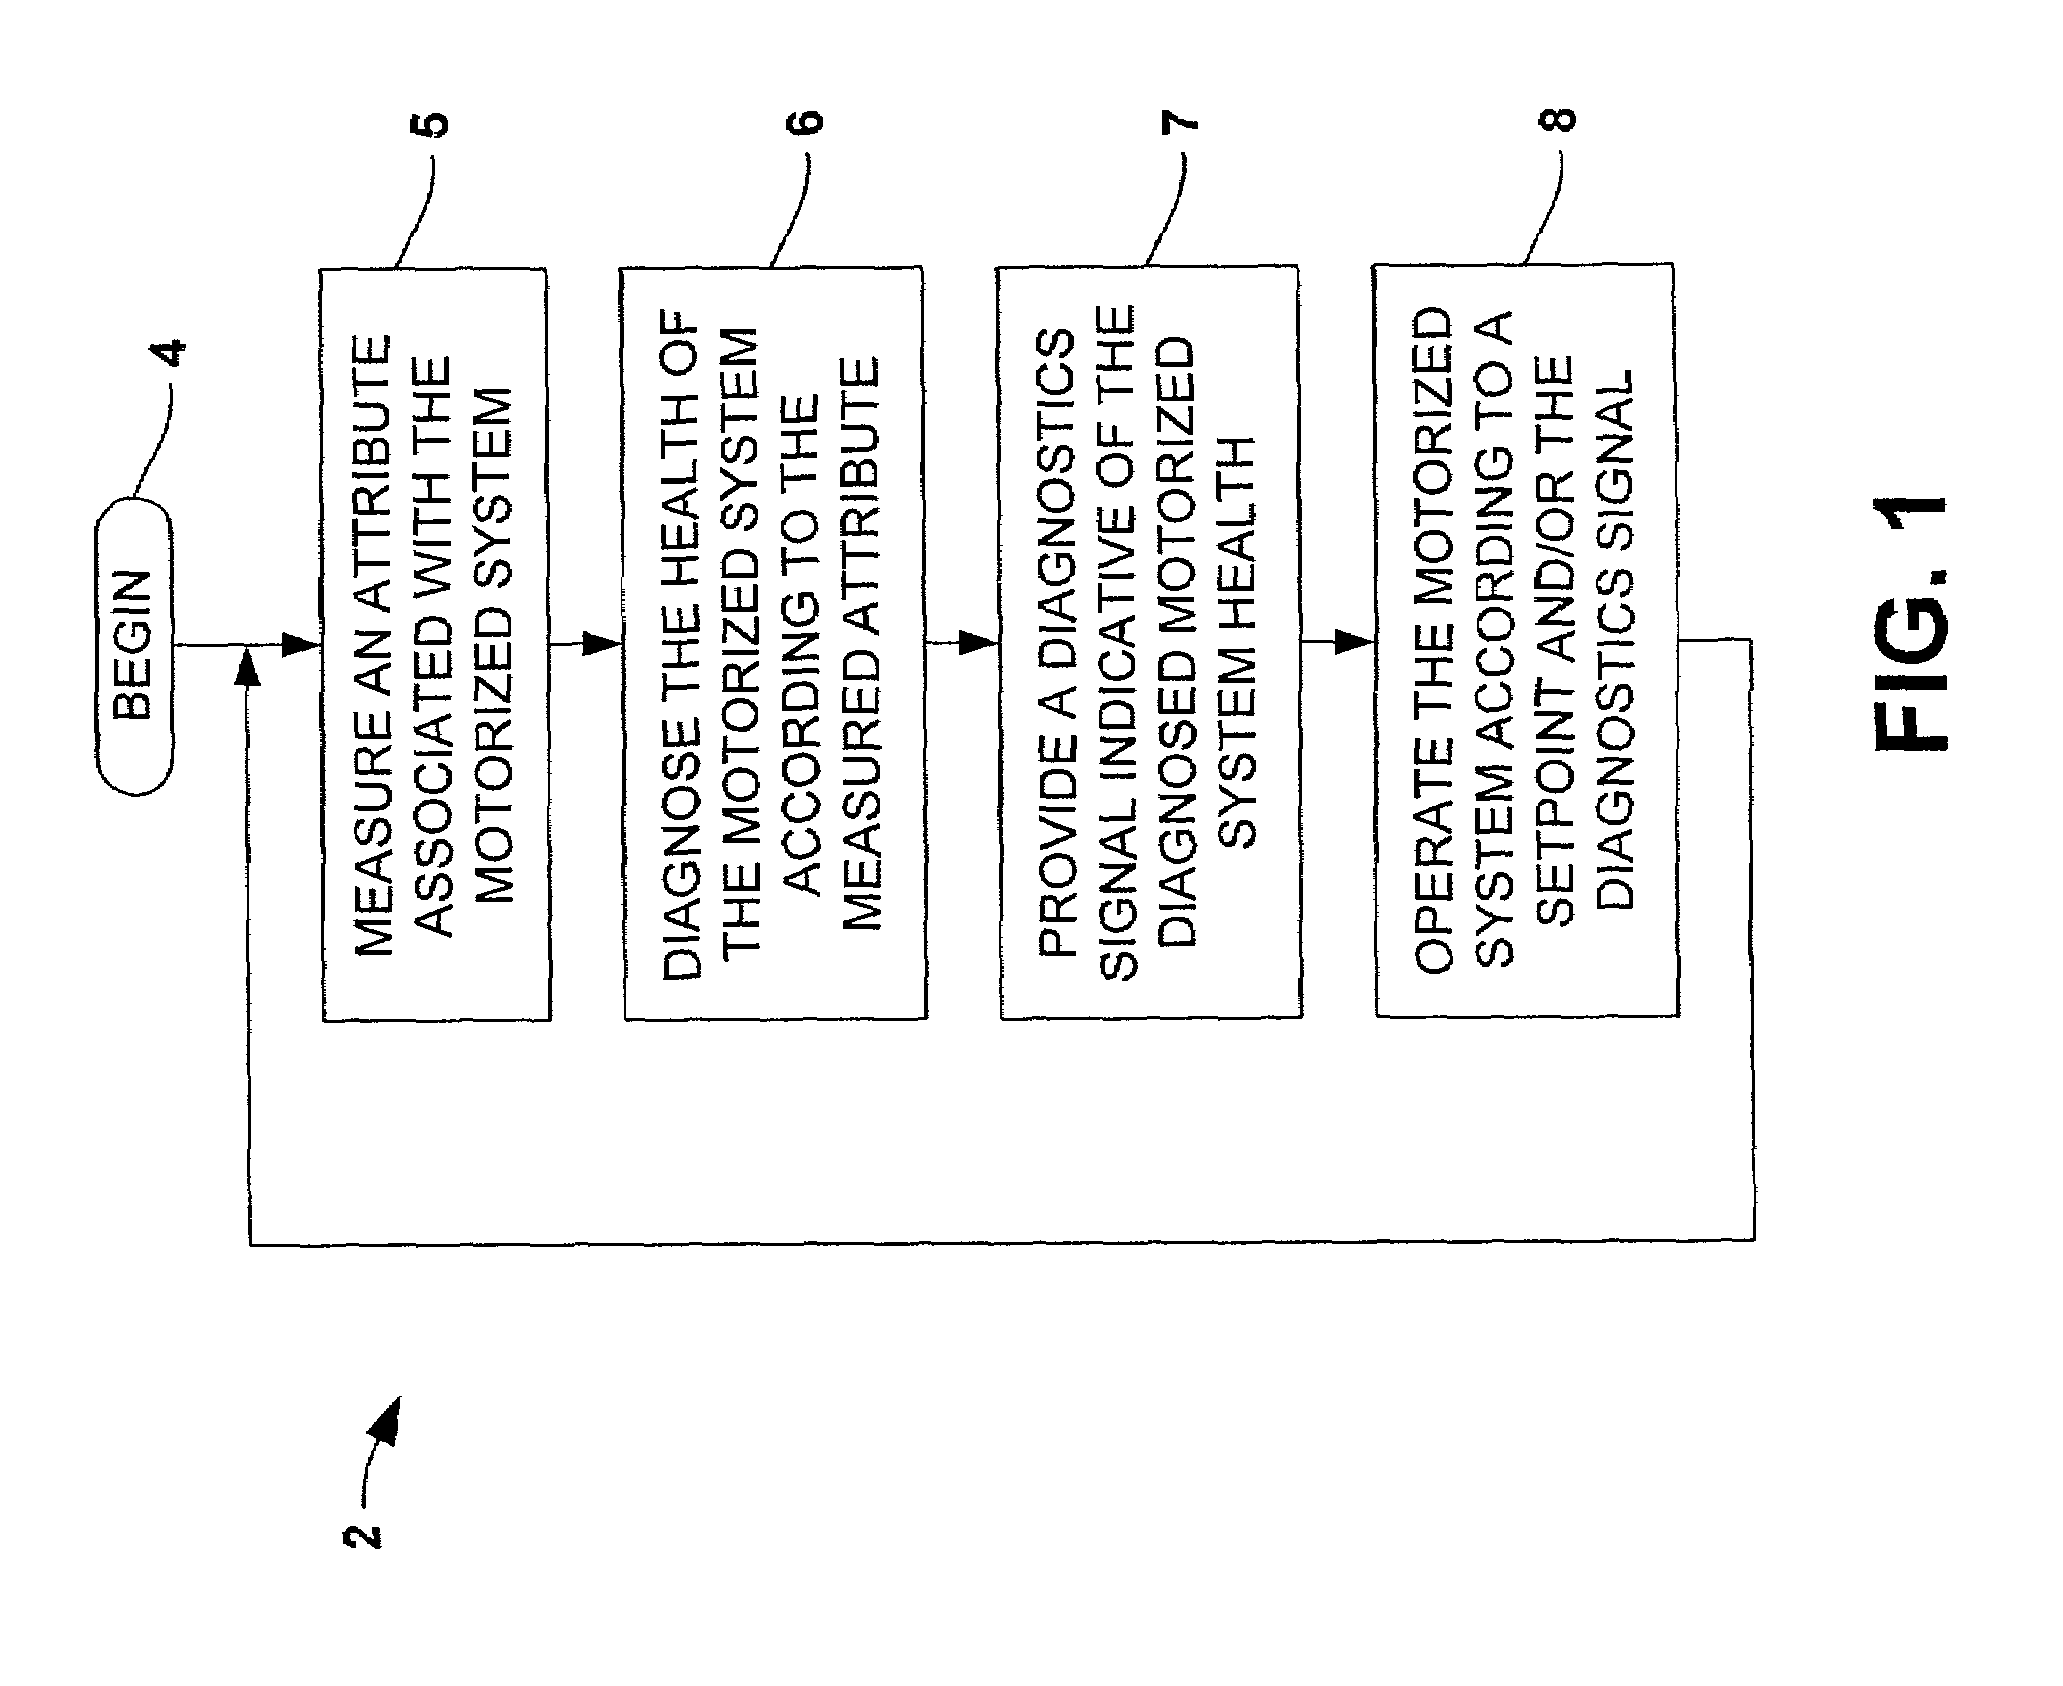 Motorized system integrated control and diagnostics using vibration, pressure, temperature, speed, and/or current analysis